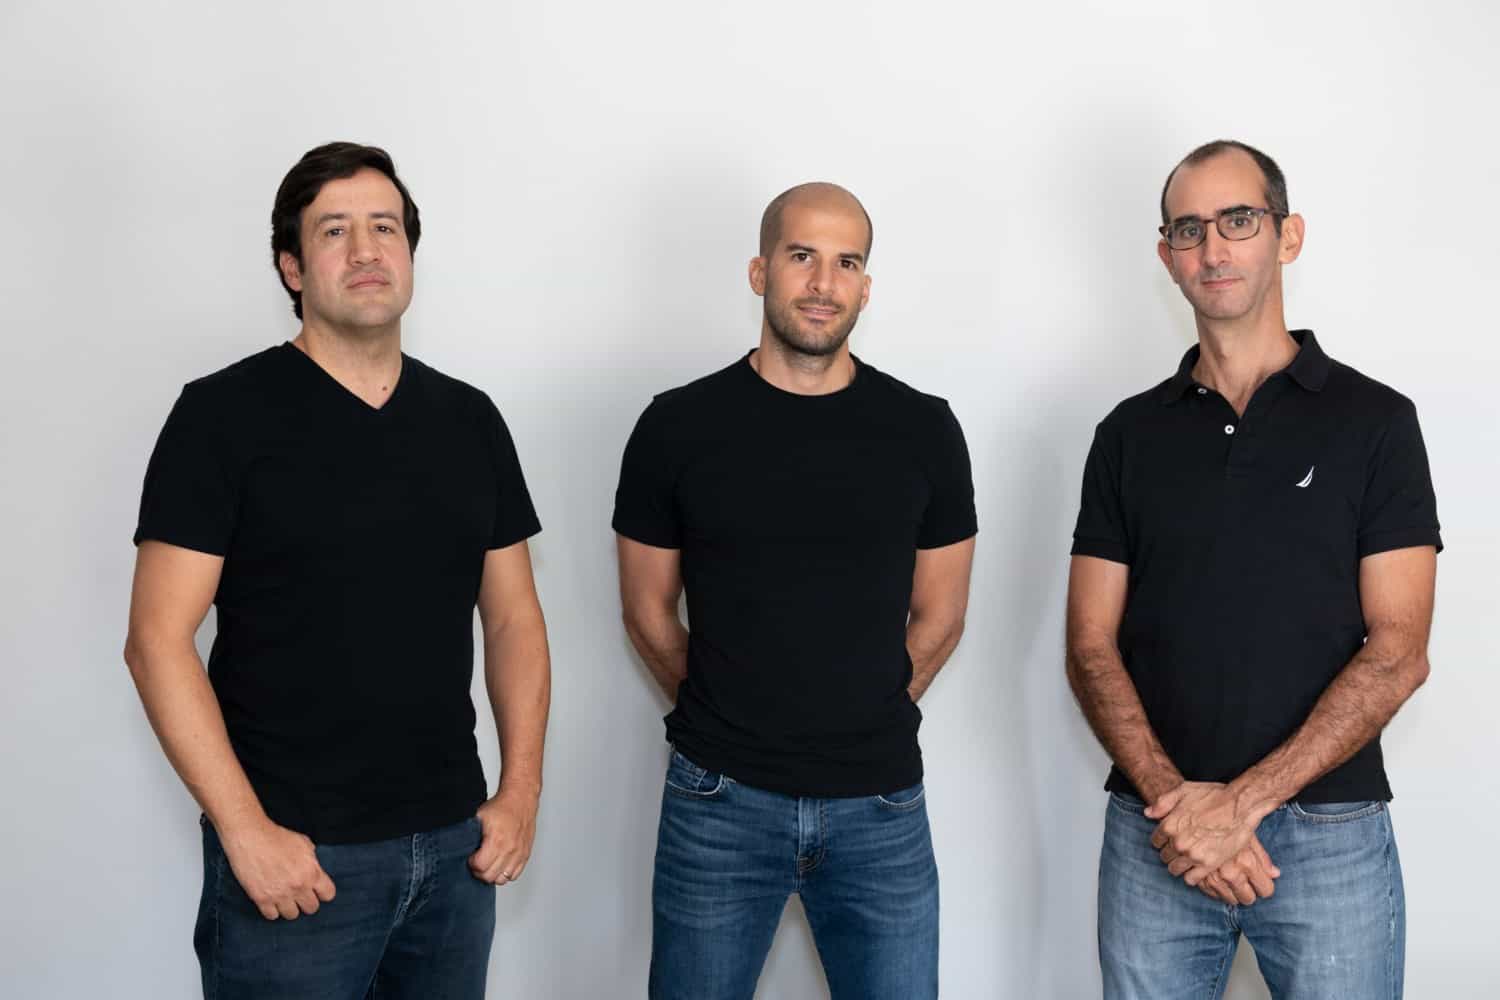 Finkargo, a fintech founded by Tomás Shuk, Santiago Molina and Andrés Ferrer, completed a Series A investment round for USD$20 million.